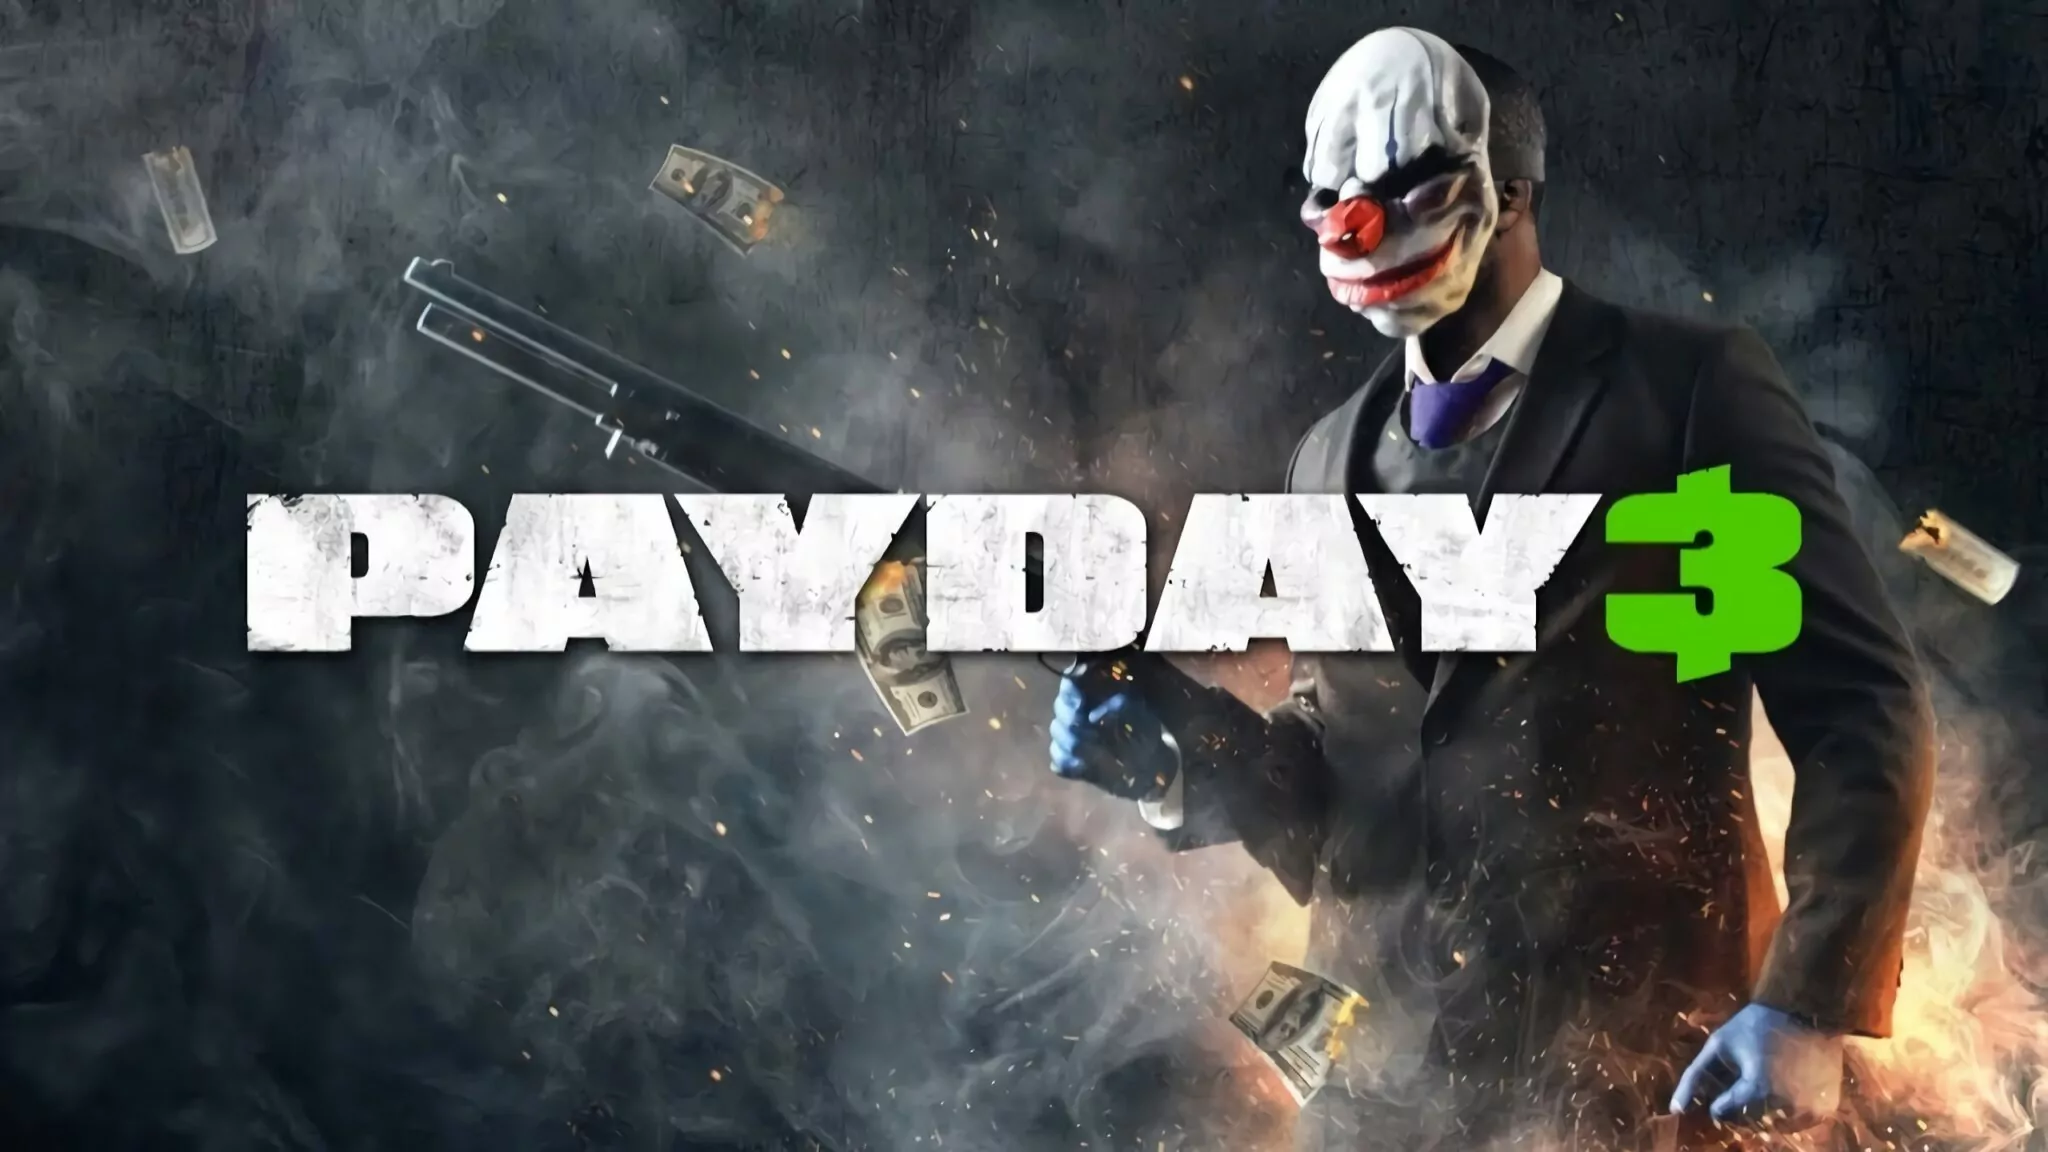 Lobby in payday 2 фото 74